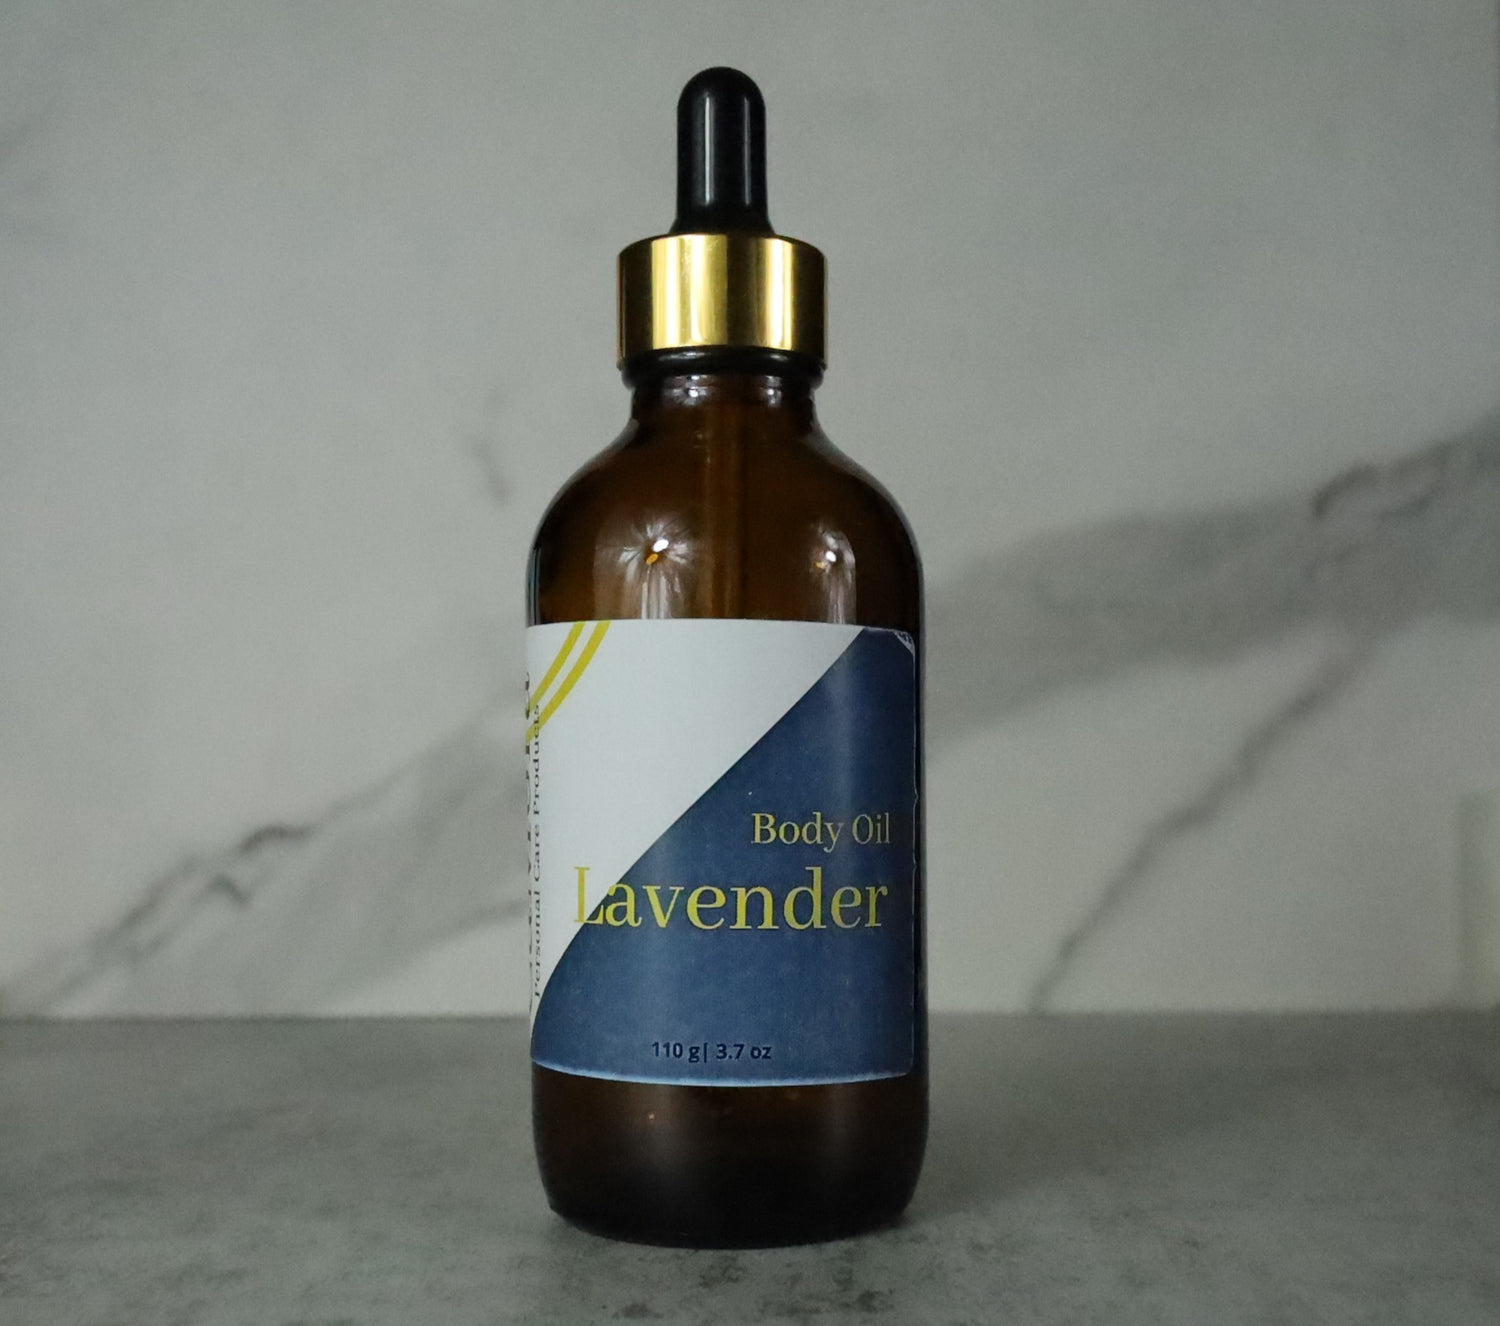 Lavender Organic body oil, 4 ounces, infused with organic lavender grown in Missouri Valley Iowa.